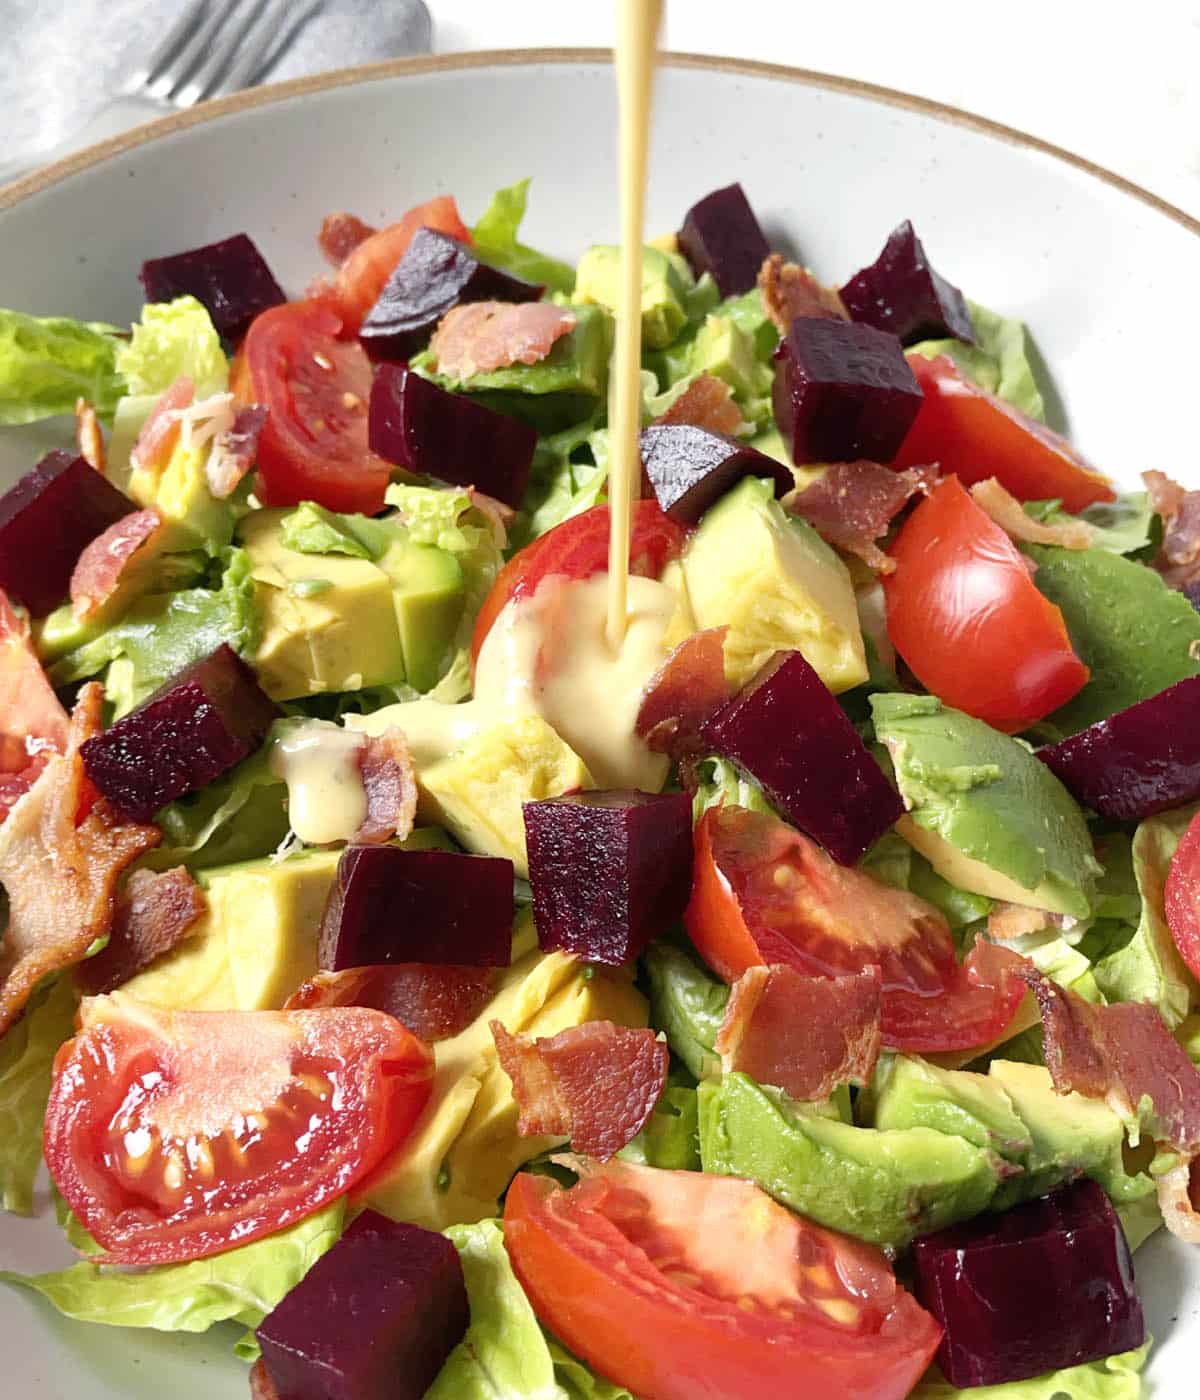 Yellow dressing being poured over a salad of red tomatoes, purple beets, green avocado chunks, and cooked bacon.